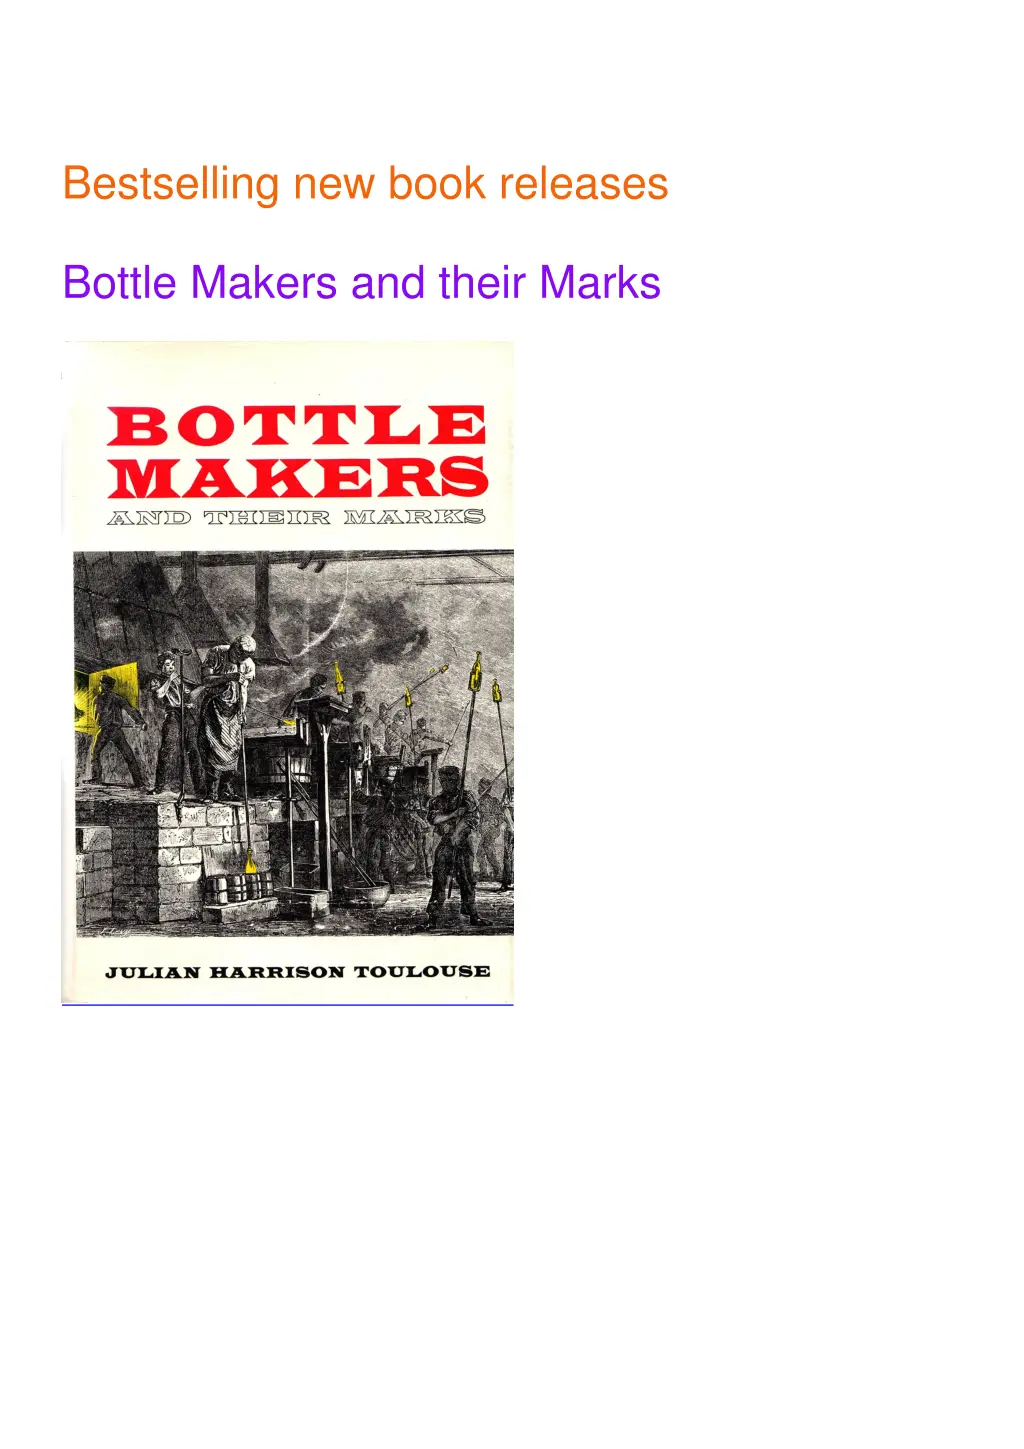 bestselling new book releases bottle makers